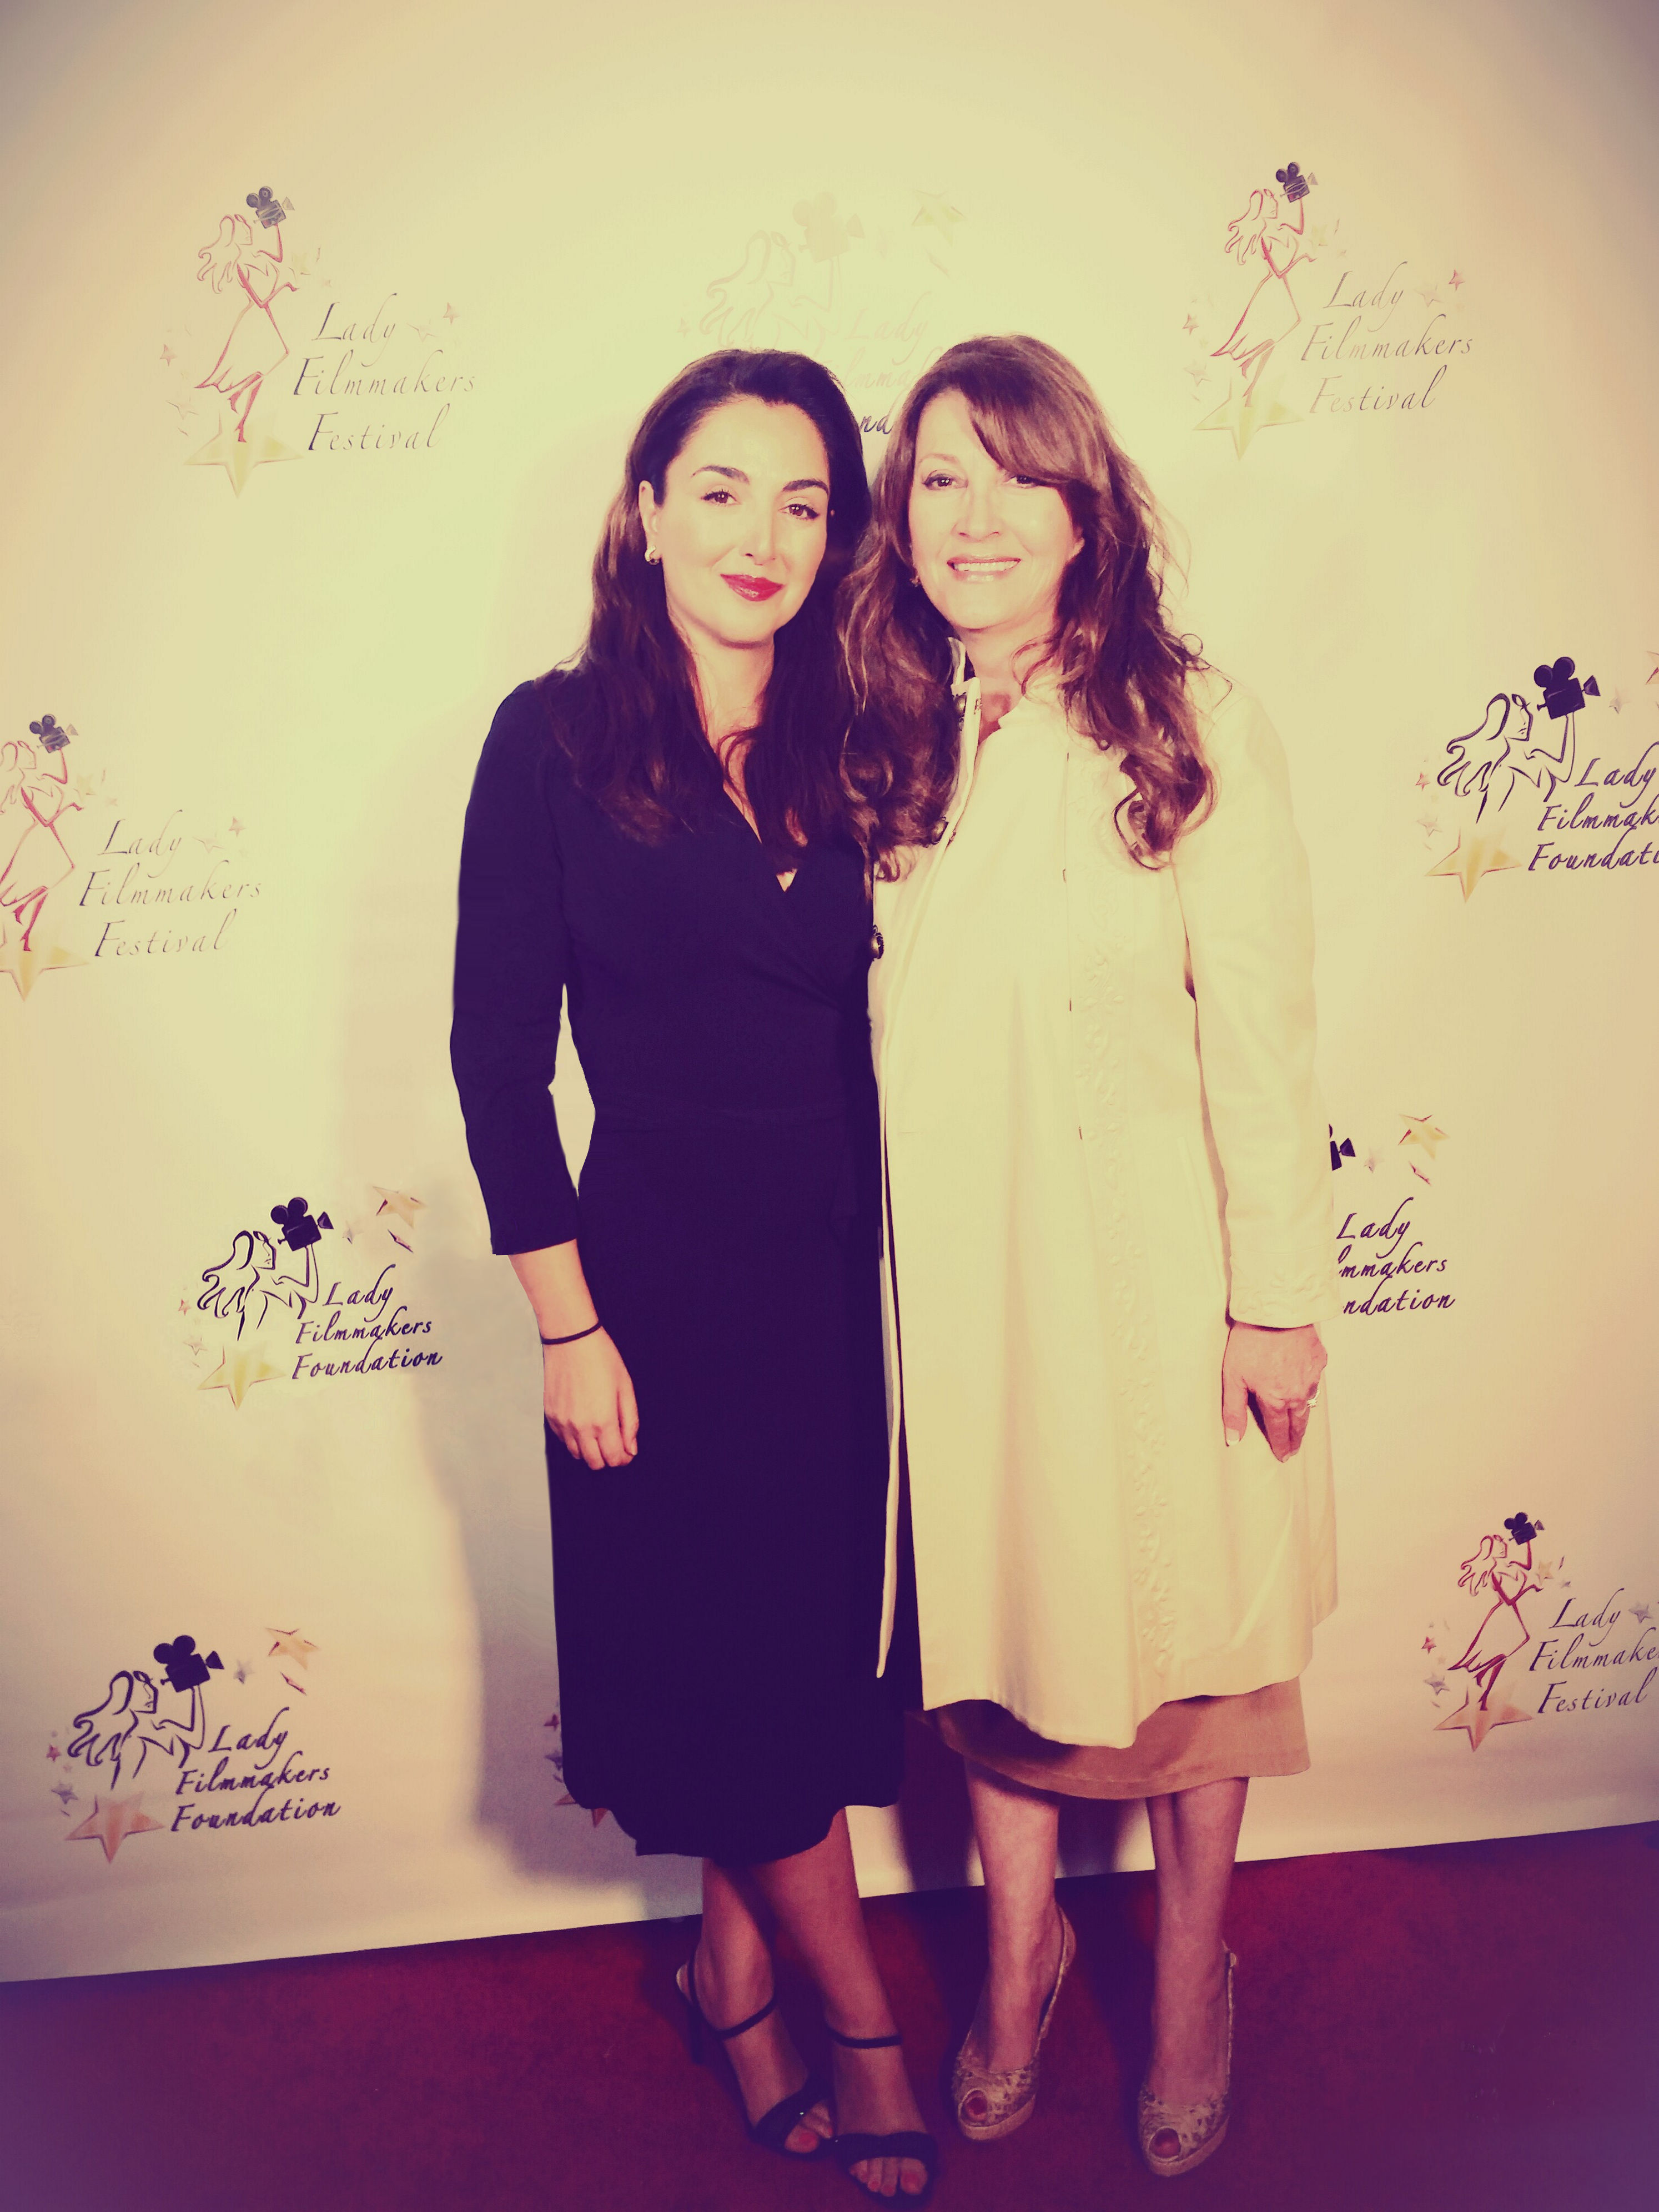 Award-winning Writer, Director And Actor Nicole Kian Sadighi with co-star Mary Apick on the red carpet at the Lady Filmmakers Film Festival where 'I Am Neda' was the official selection and winner of the Jury Award